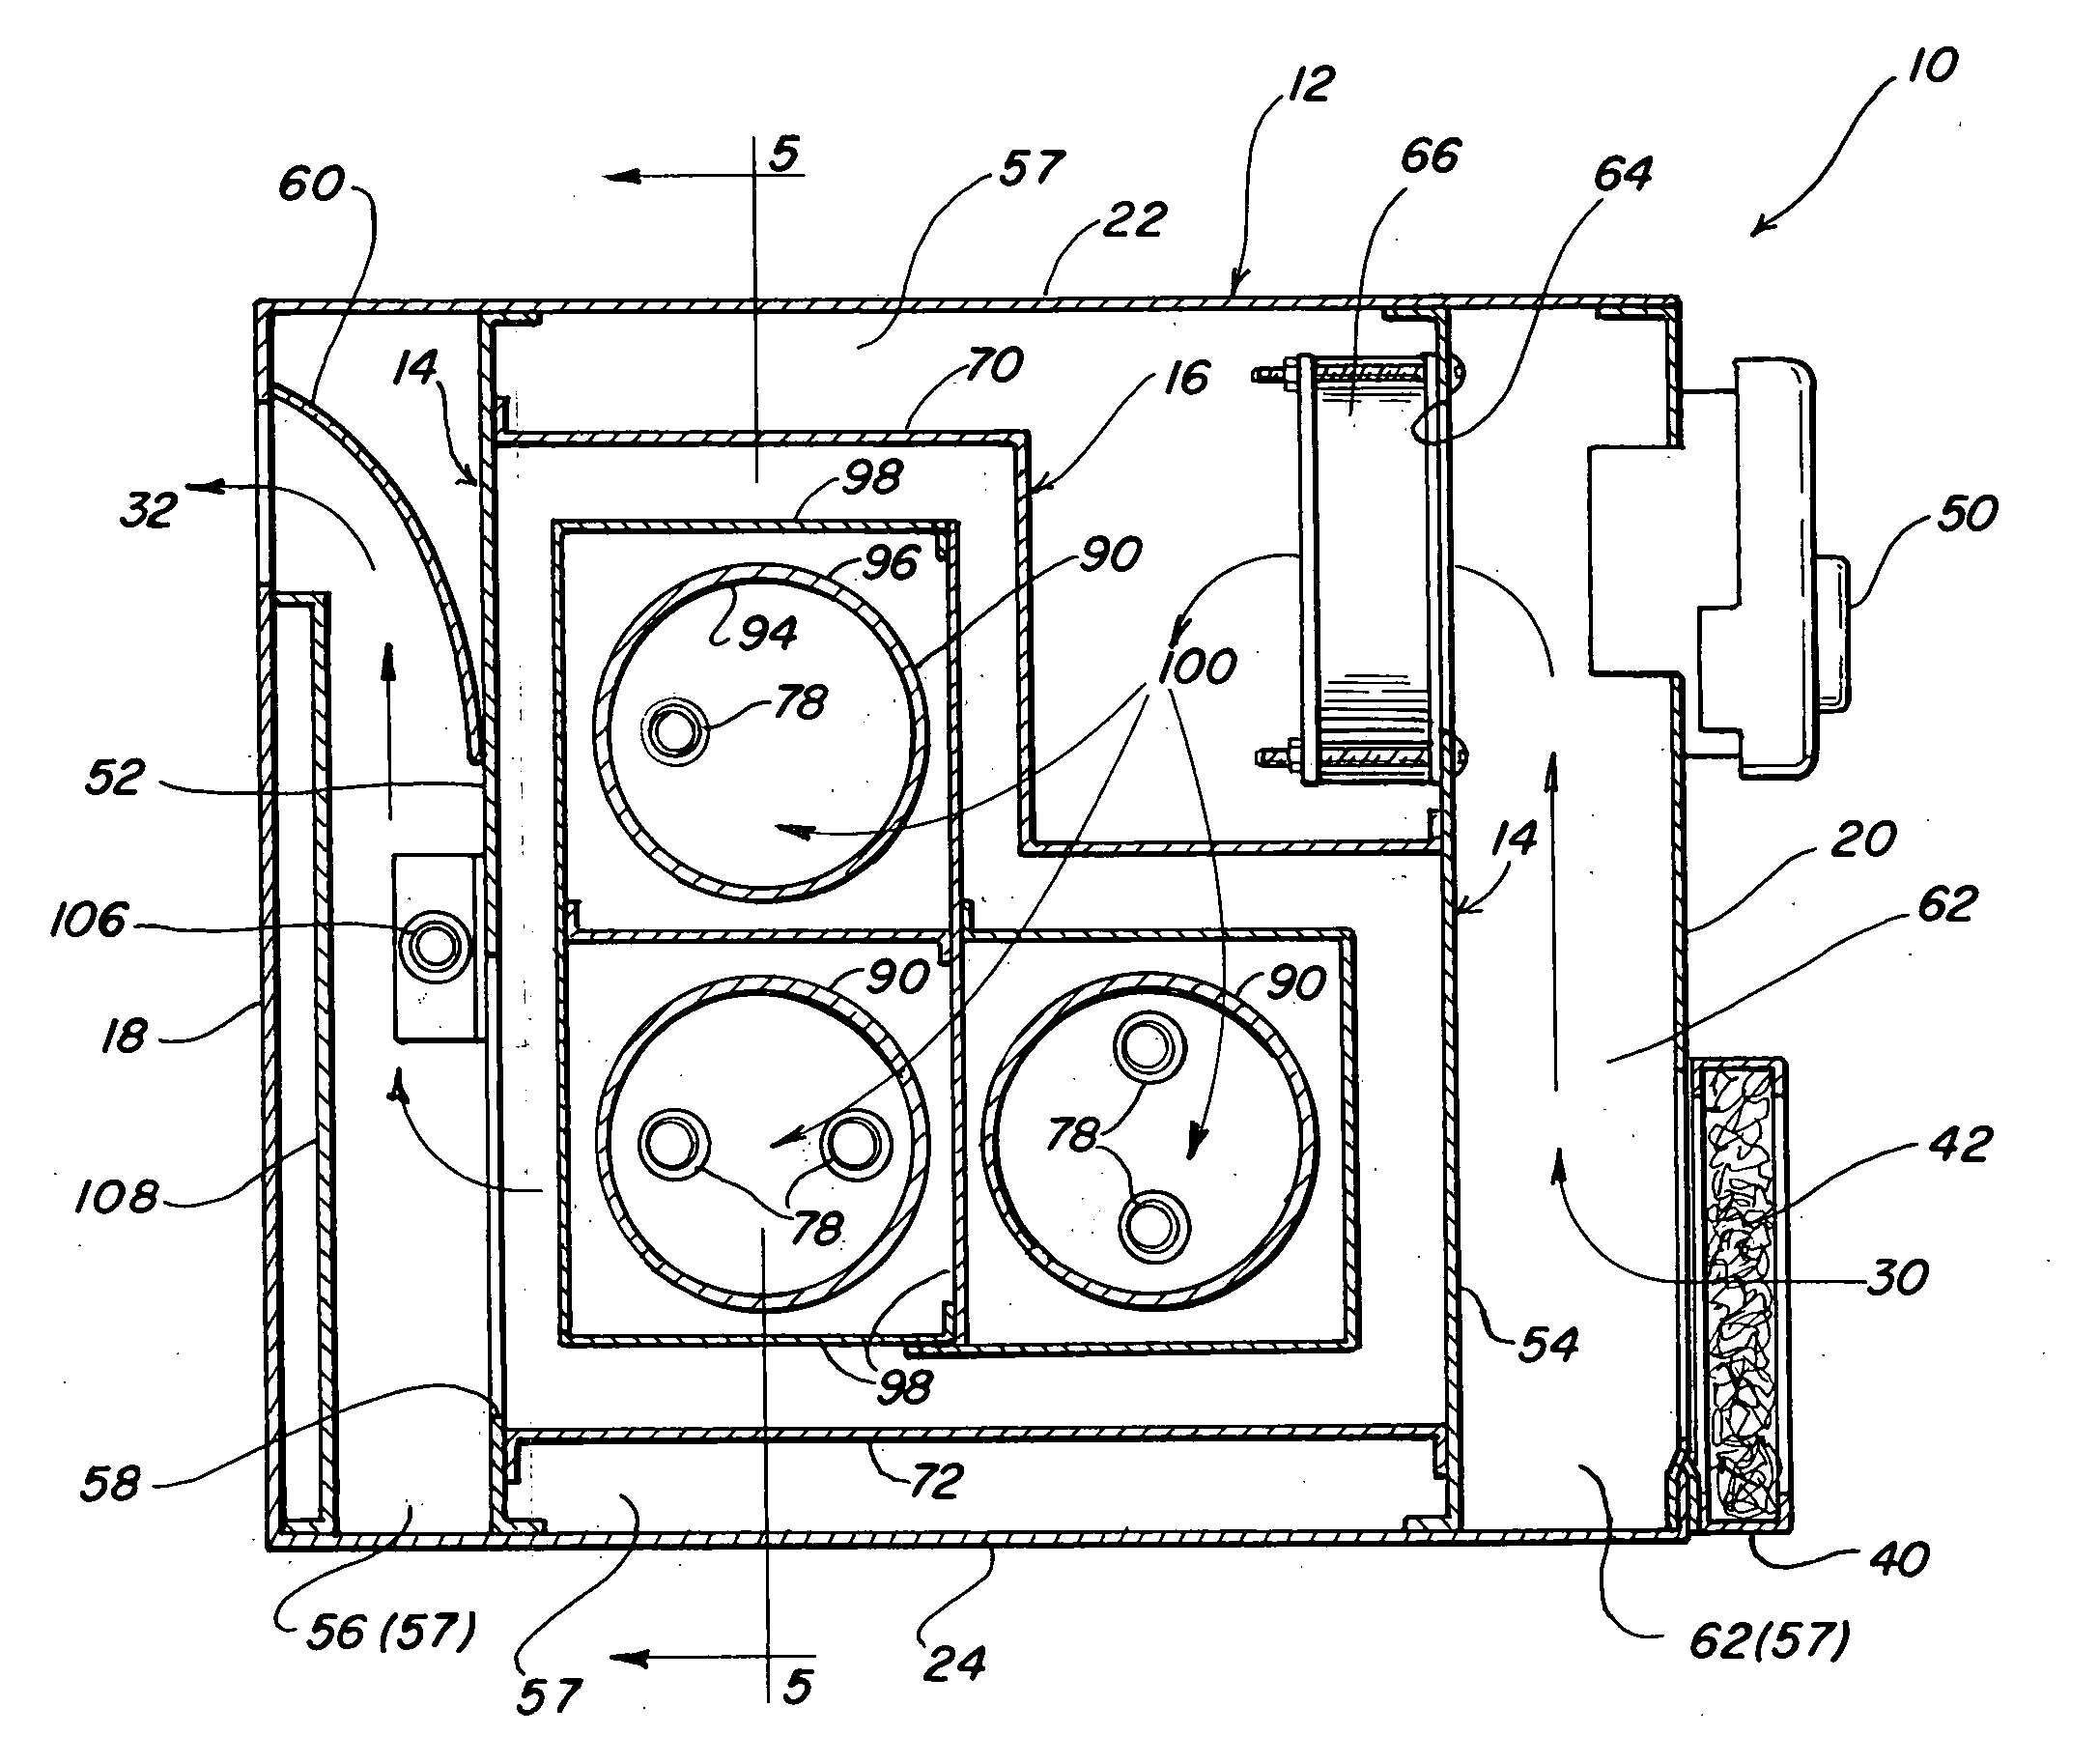 Space heater with pretreated heat exchanger